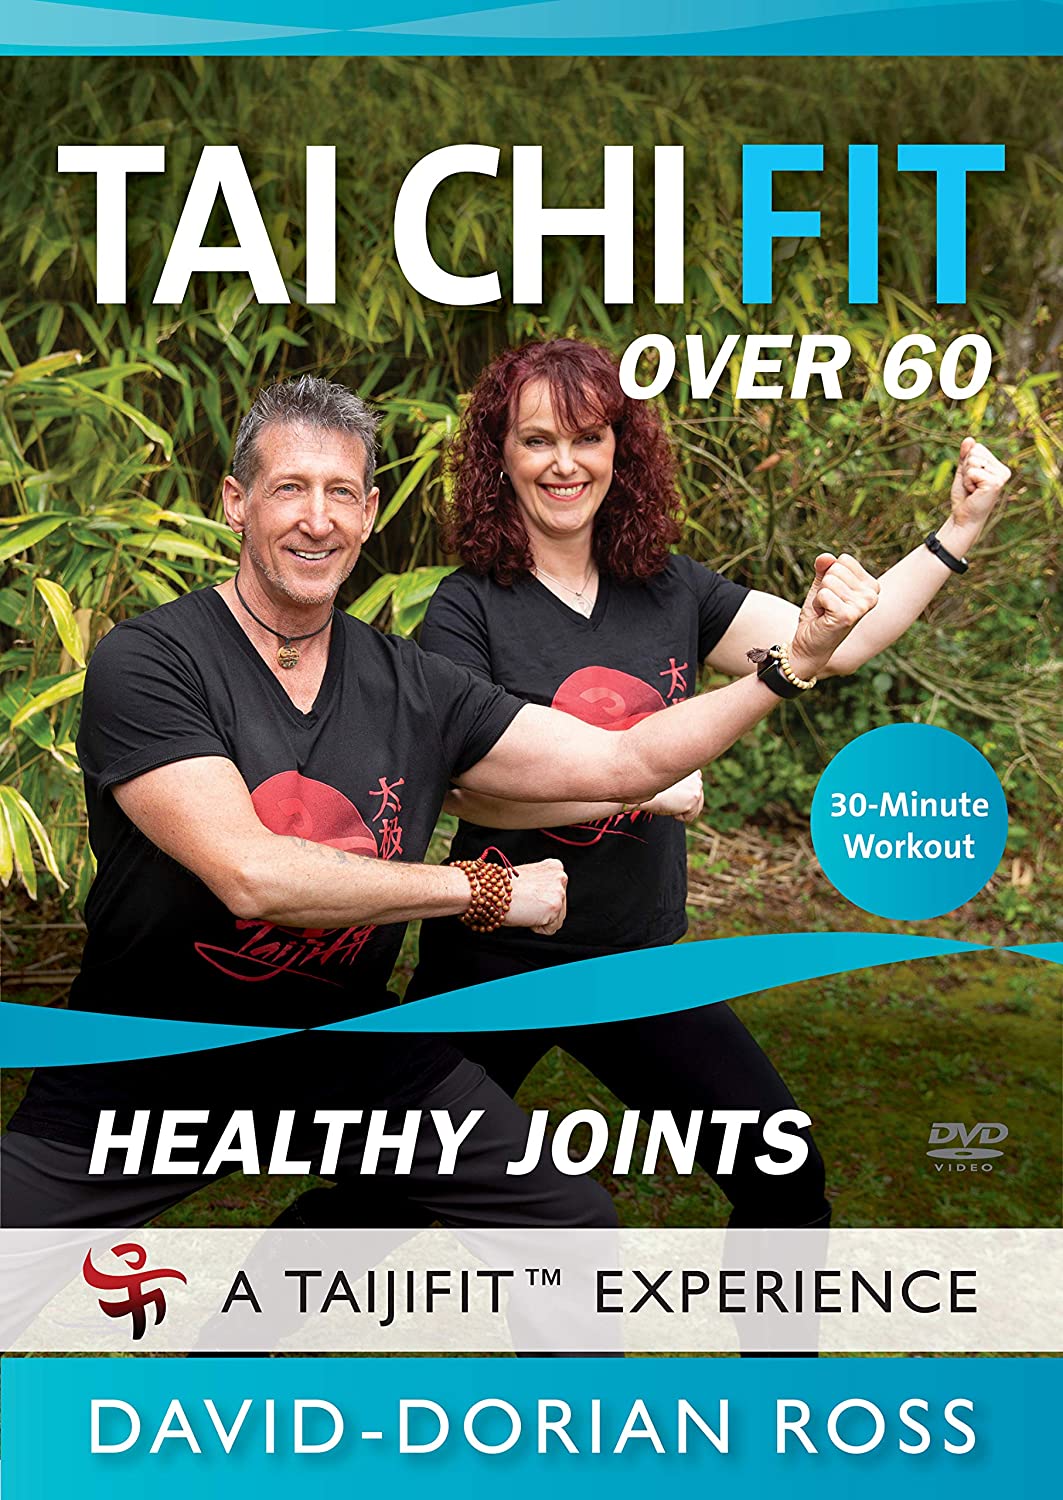 Tai Chi Fit Over 60: Healthy Joints DVD with David-Dorian Ross - Budovideos Inc